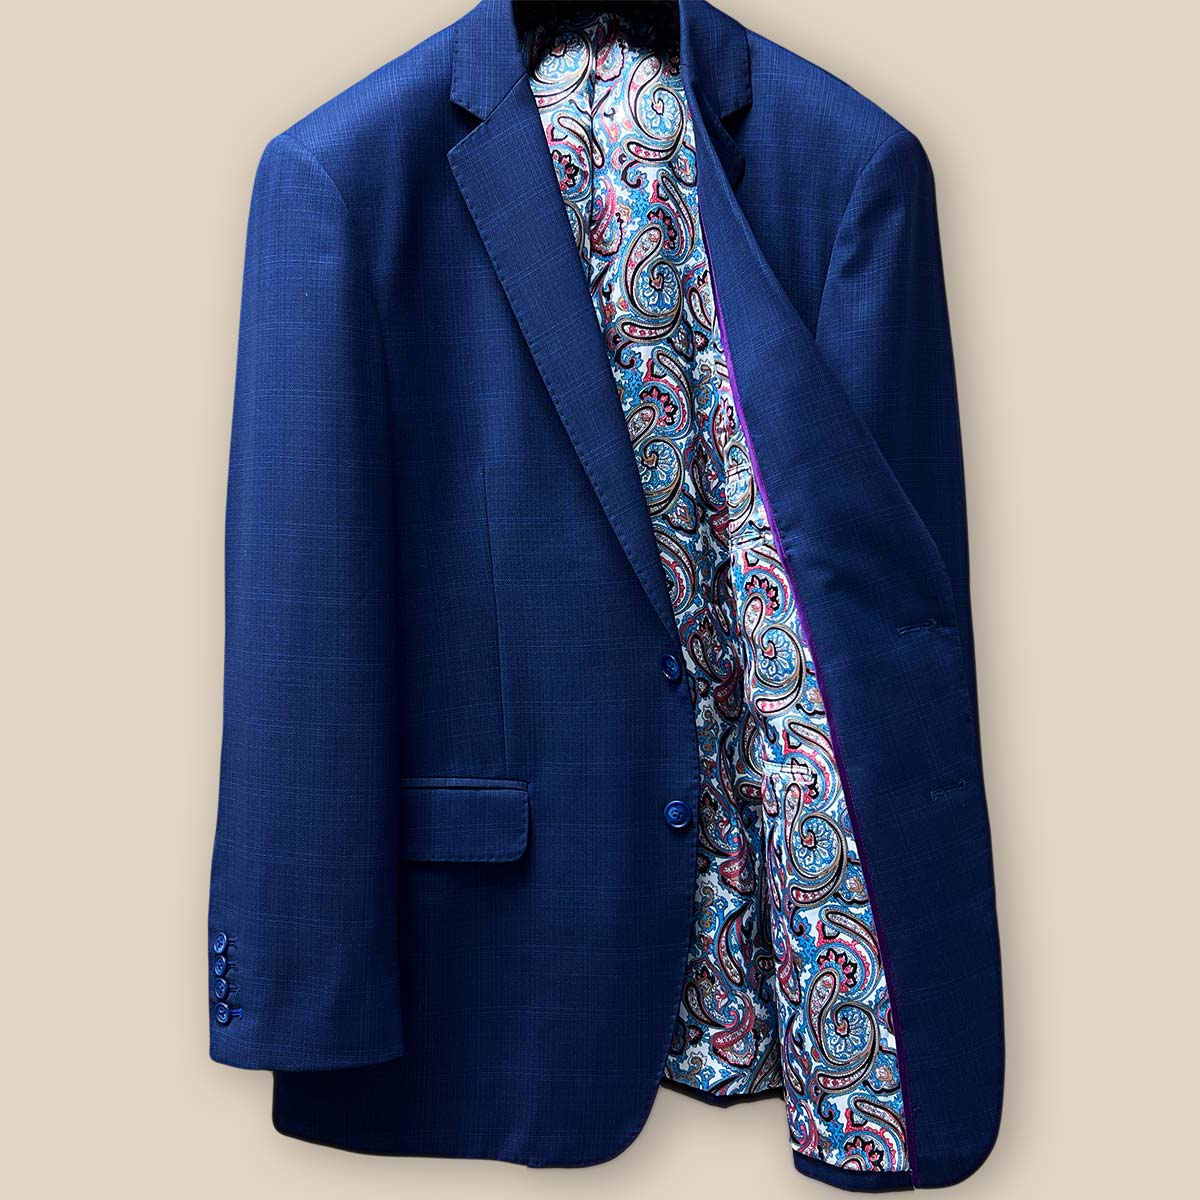 Inside left view of the royal blue suit jacket showcasing the multi-color fancy paisley print lining.